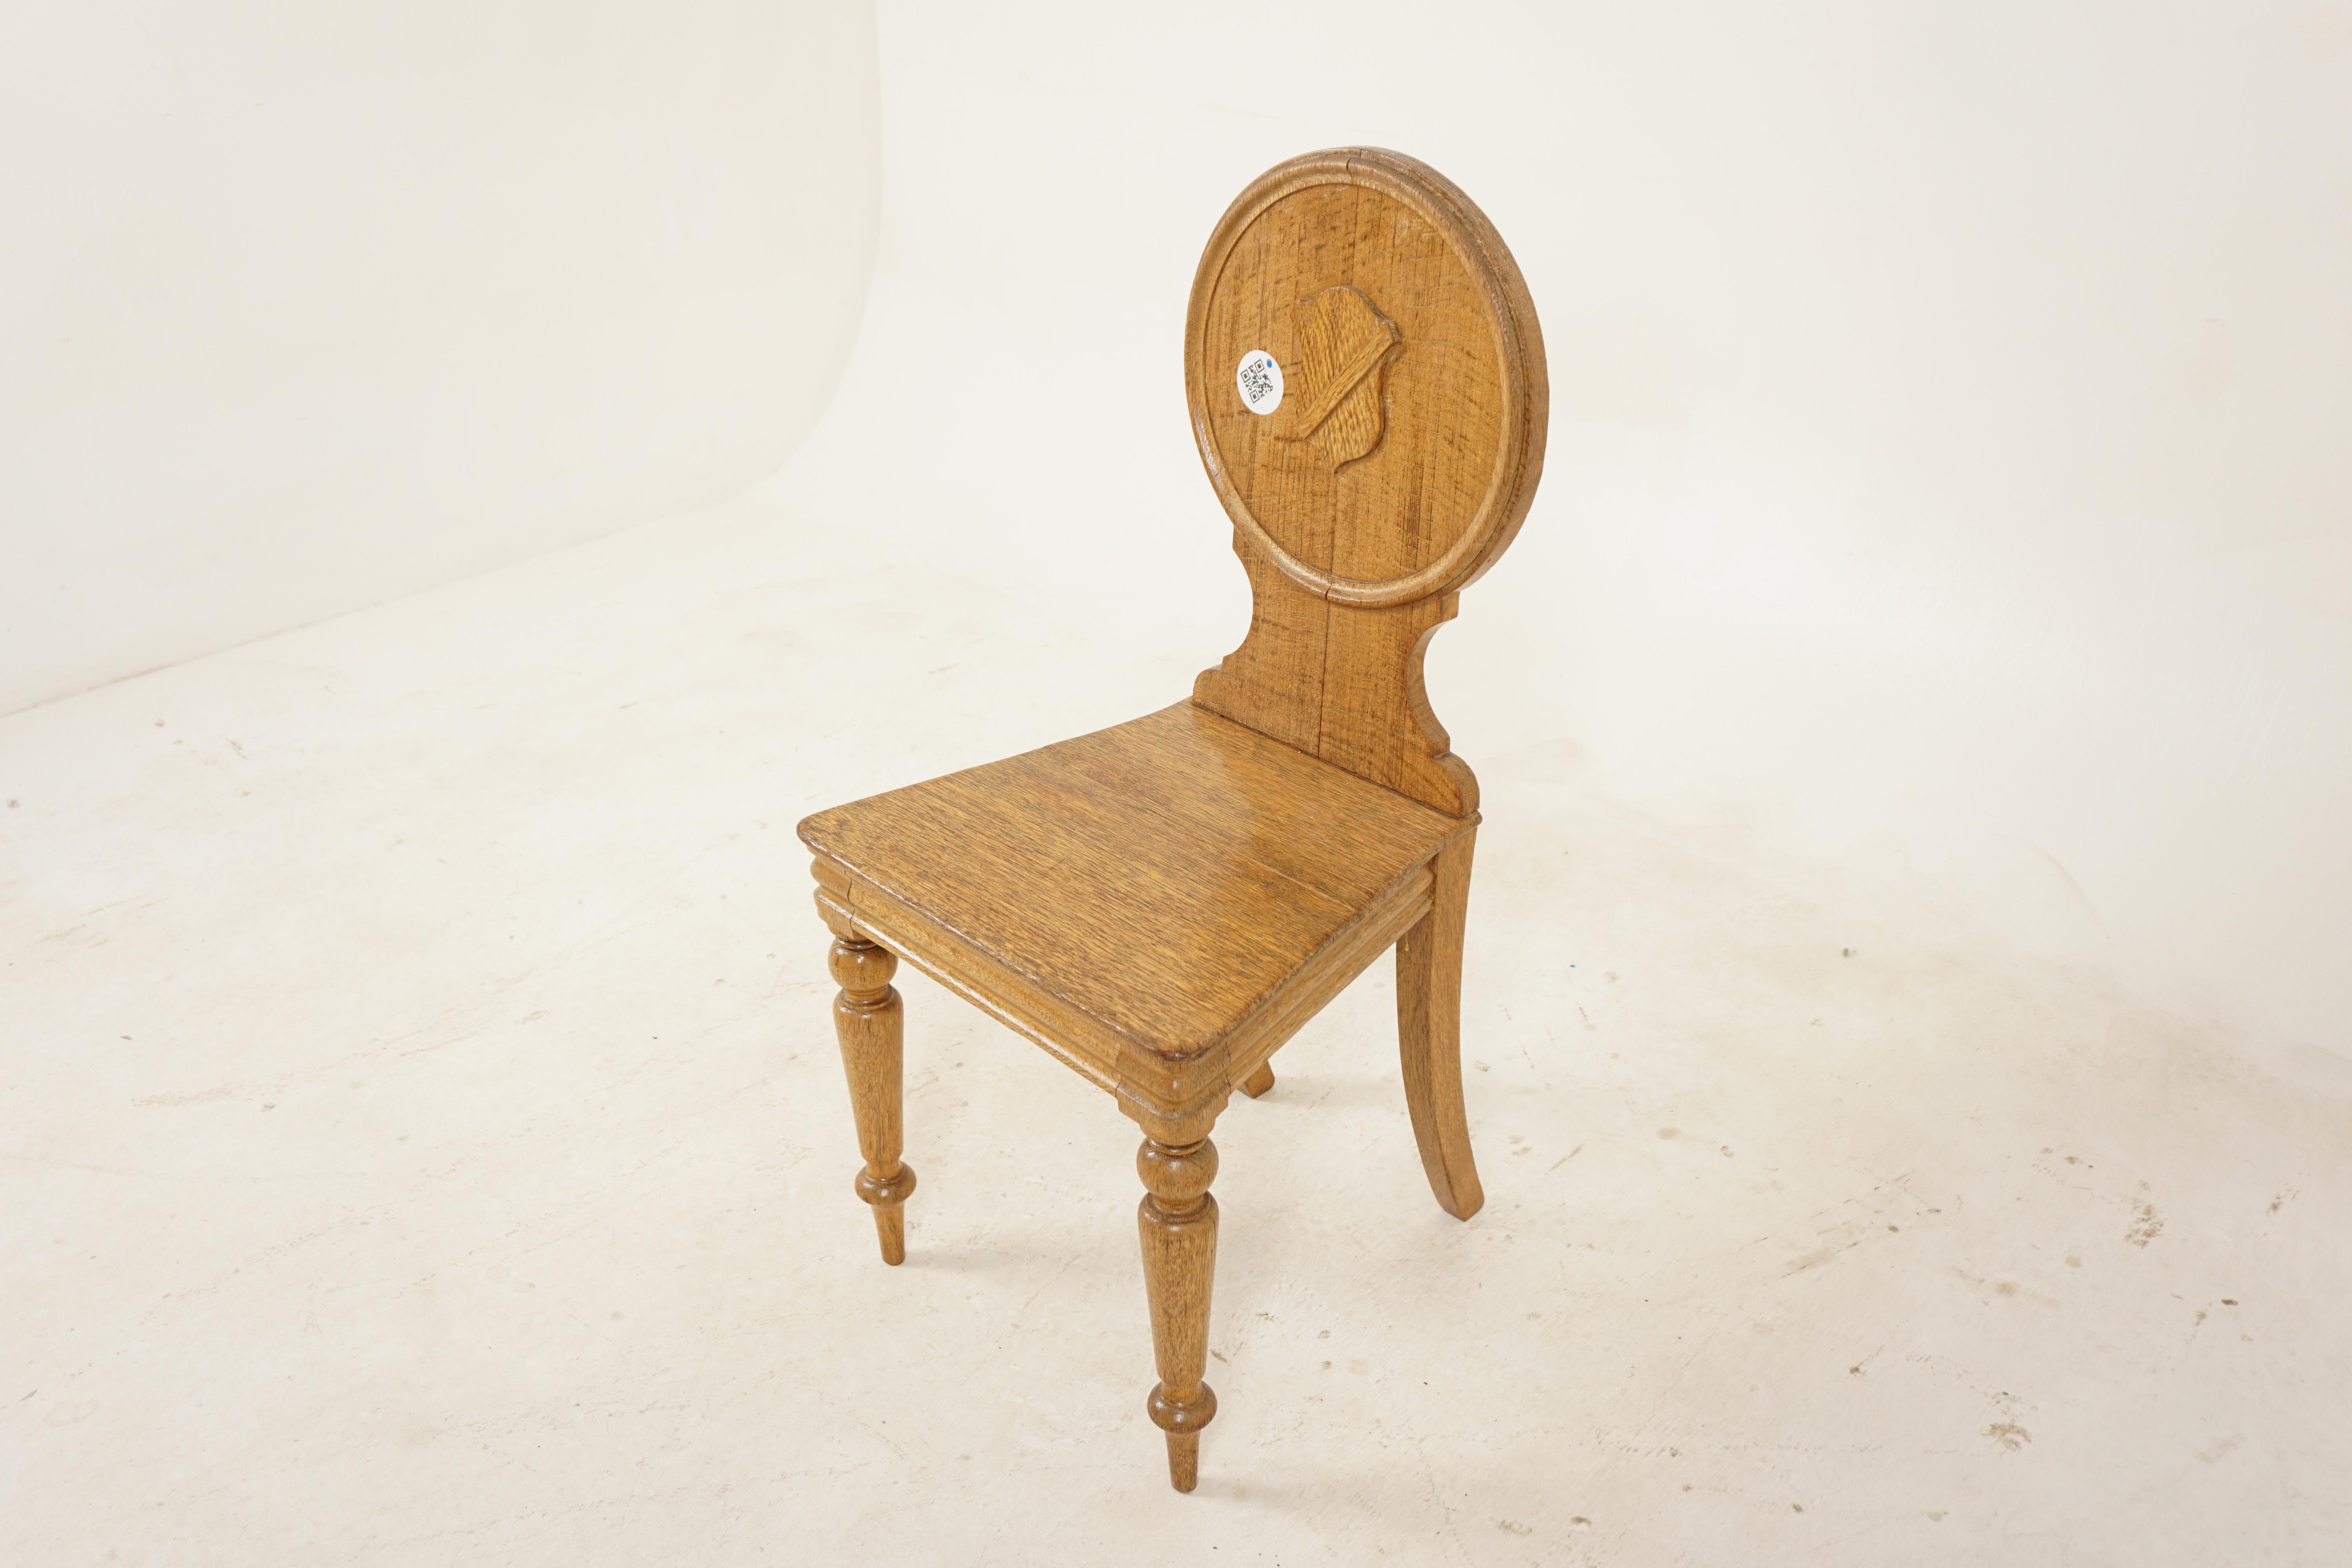 Victorian carved oak shield back hall chair, Scotland, 1880
Scotland 1880
Solid Oak
Original Finish
Circular shaped backrest
Sold flat base seat
Standing on turn front legs and out swept back legs
Strong in joint with no wobbles
Some marks